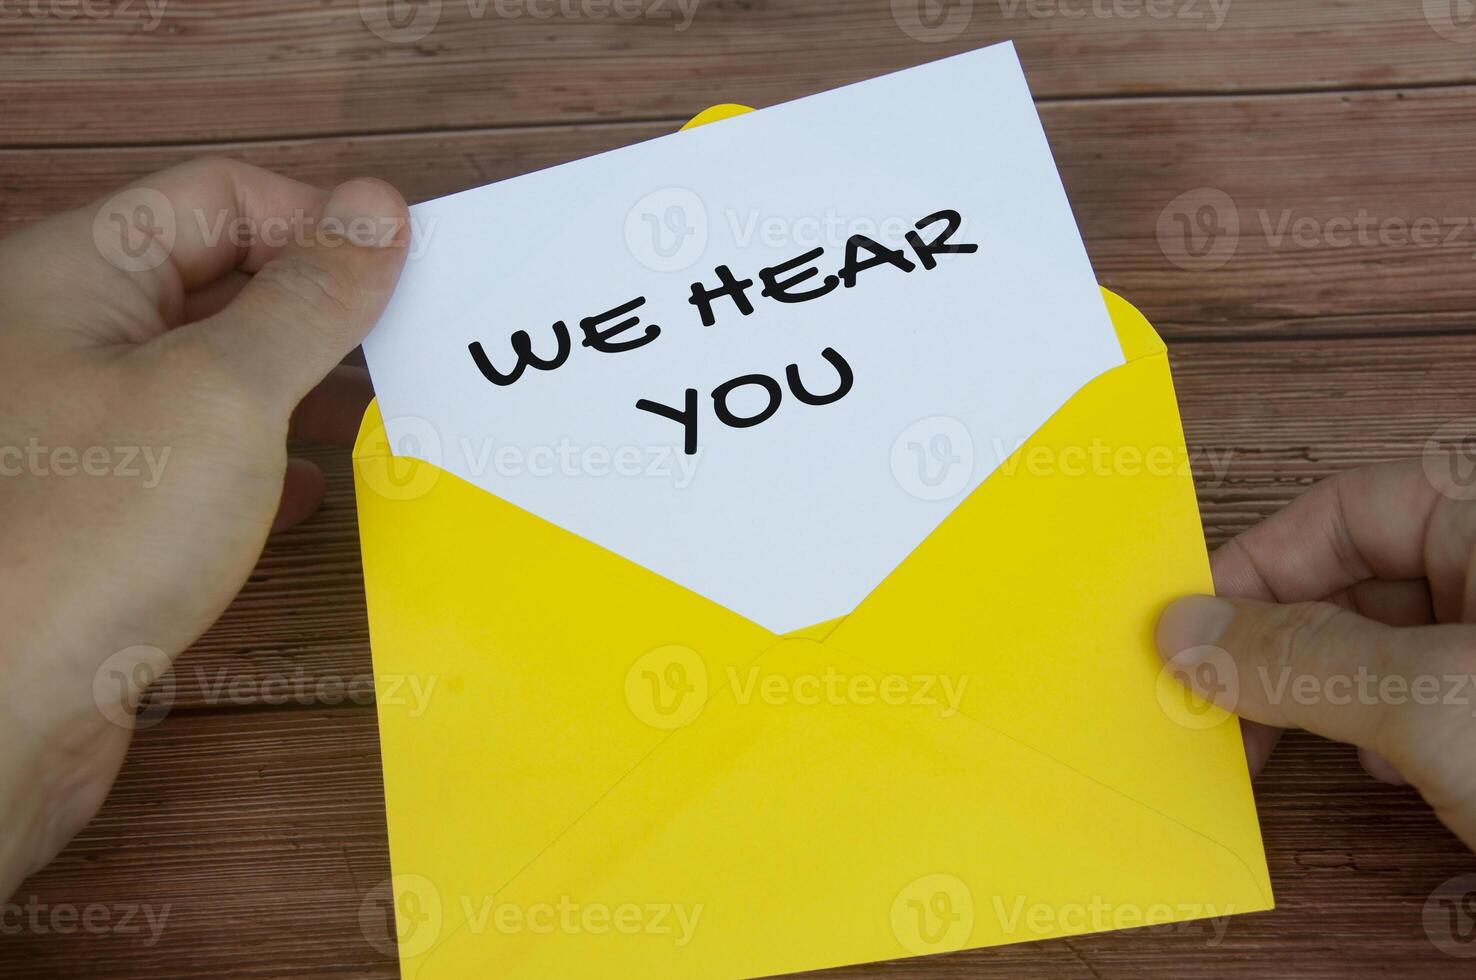 We hear you text on white notepad in yellow envelope. Listening concept photo